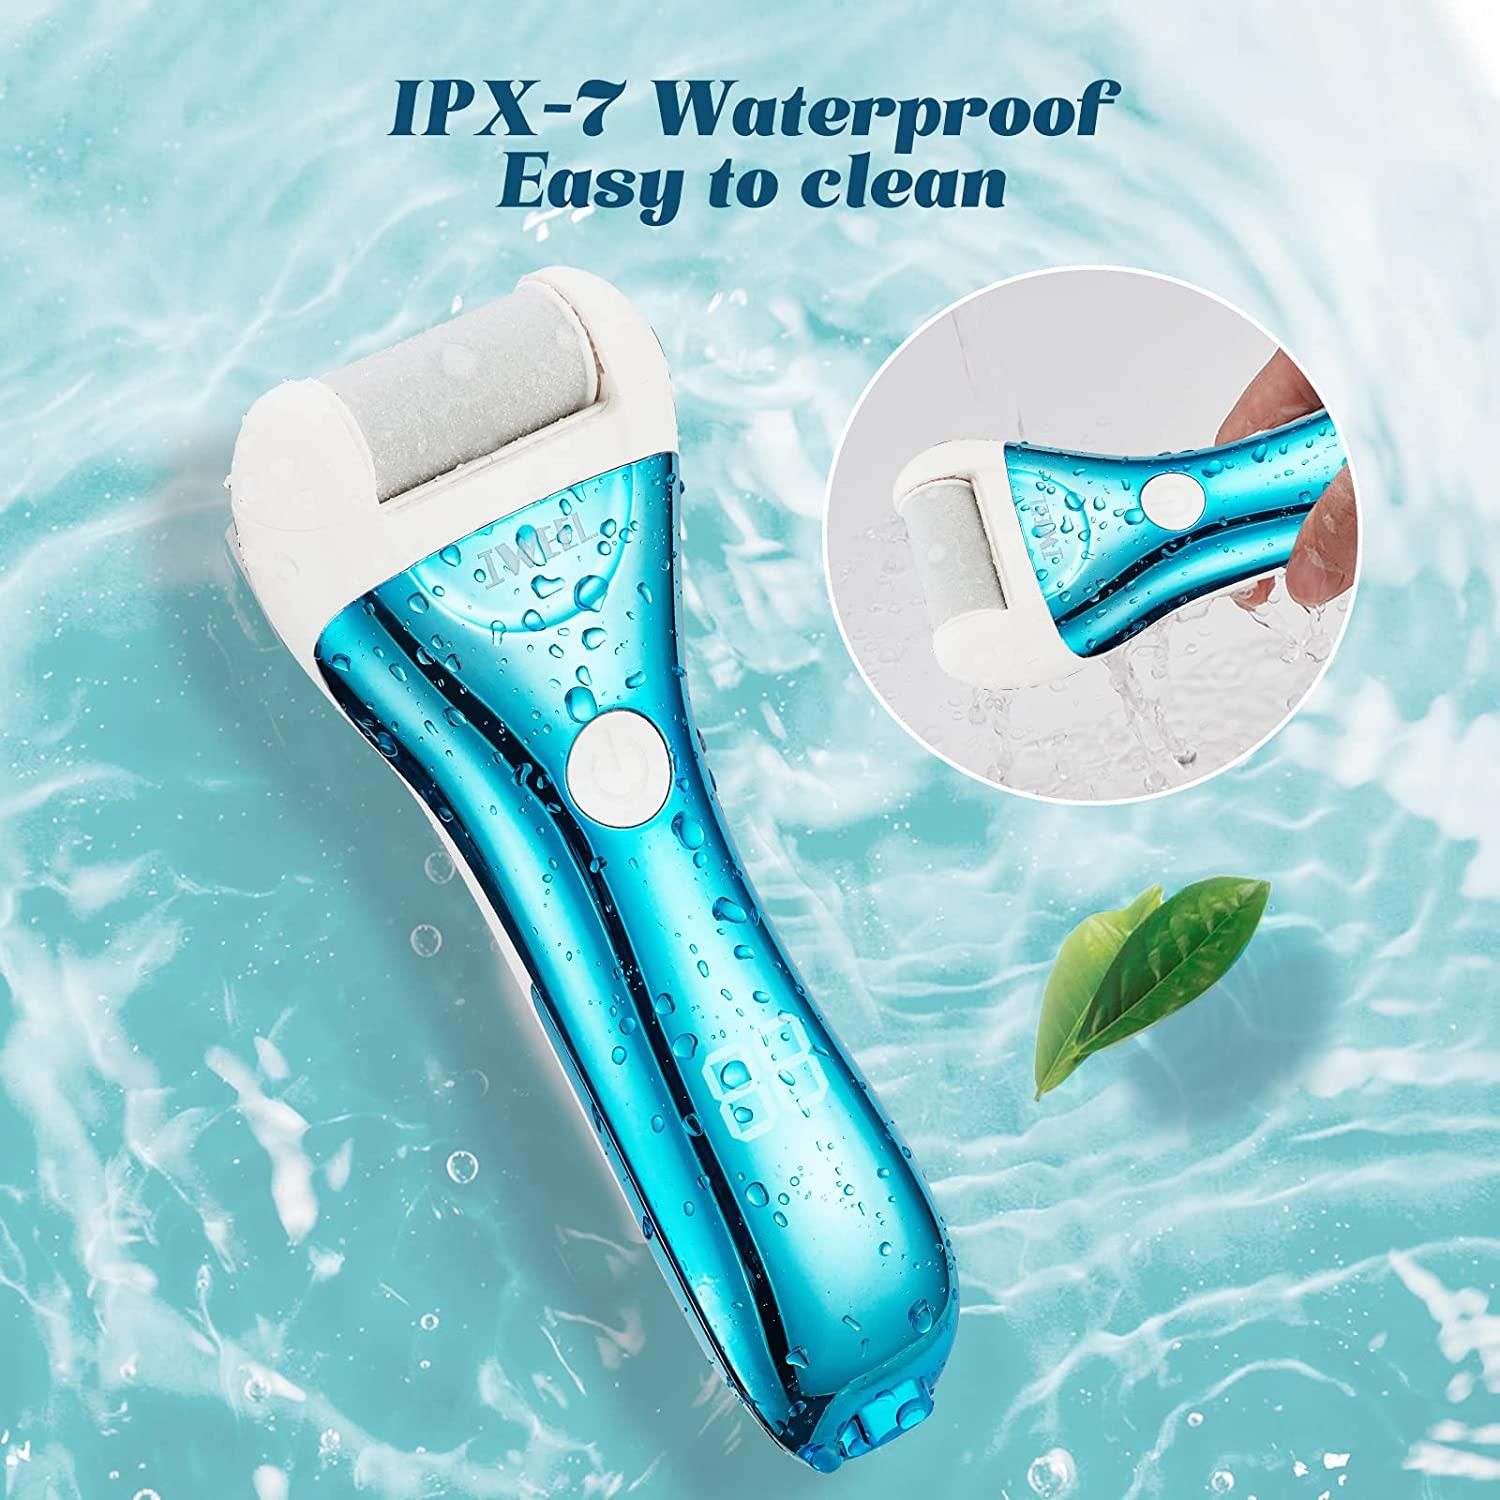 Home Essentials Manicure Pedicure Foot Scrubber Foot File Callus Remover  Callus Shaver for Feet and Hands - Blue